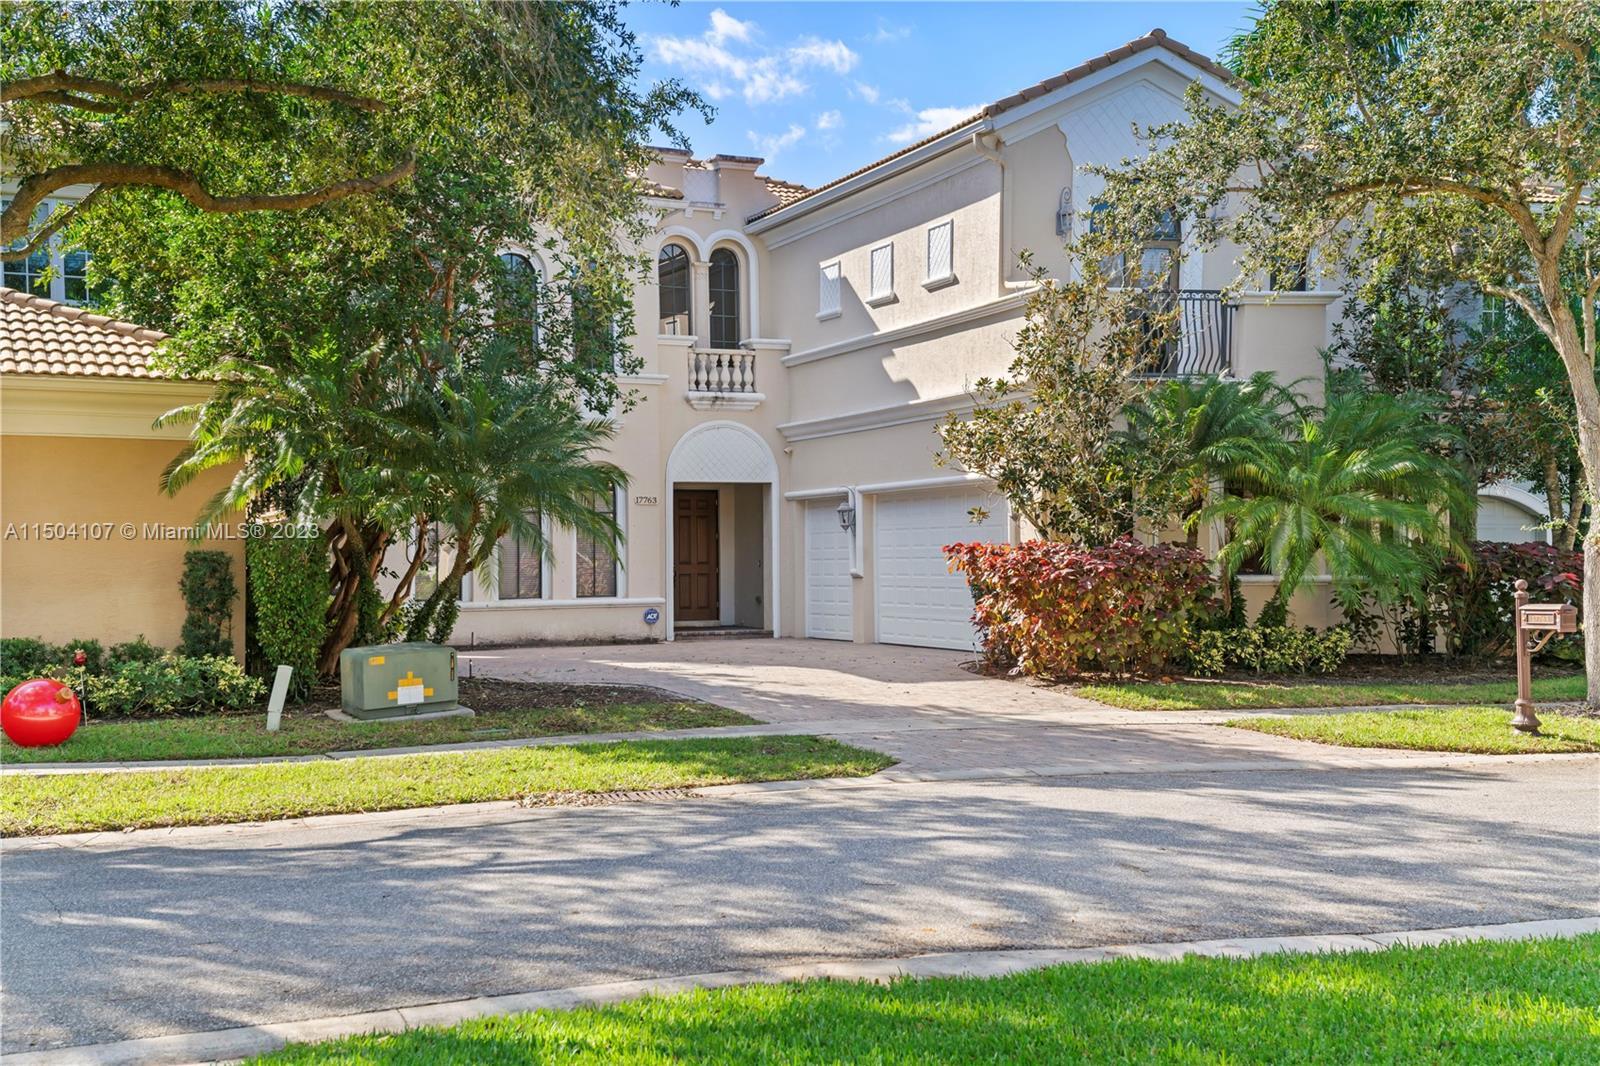 Exquisite two-story house in the heart of Boca Raton's prestigious The Oaks community. This stunning